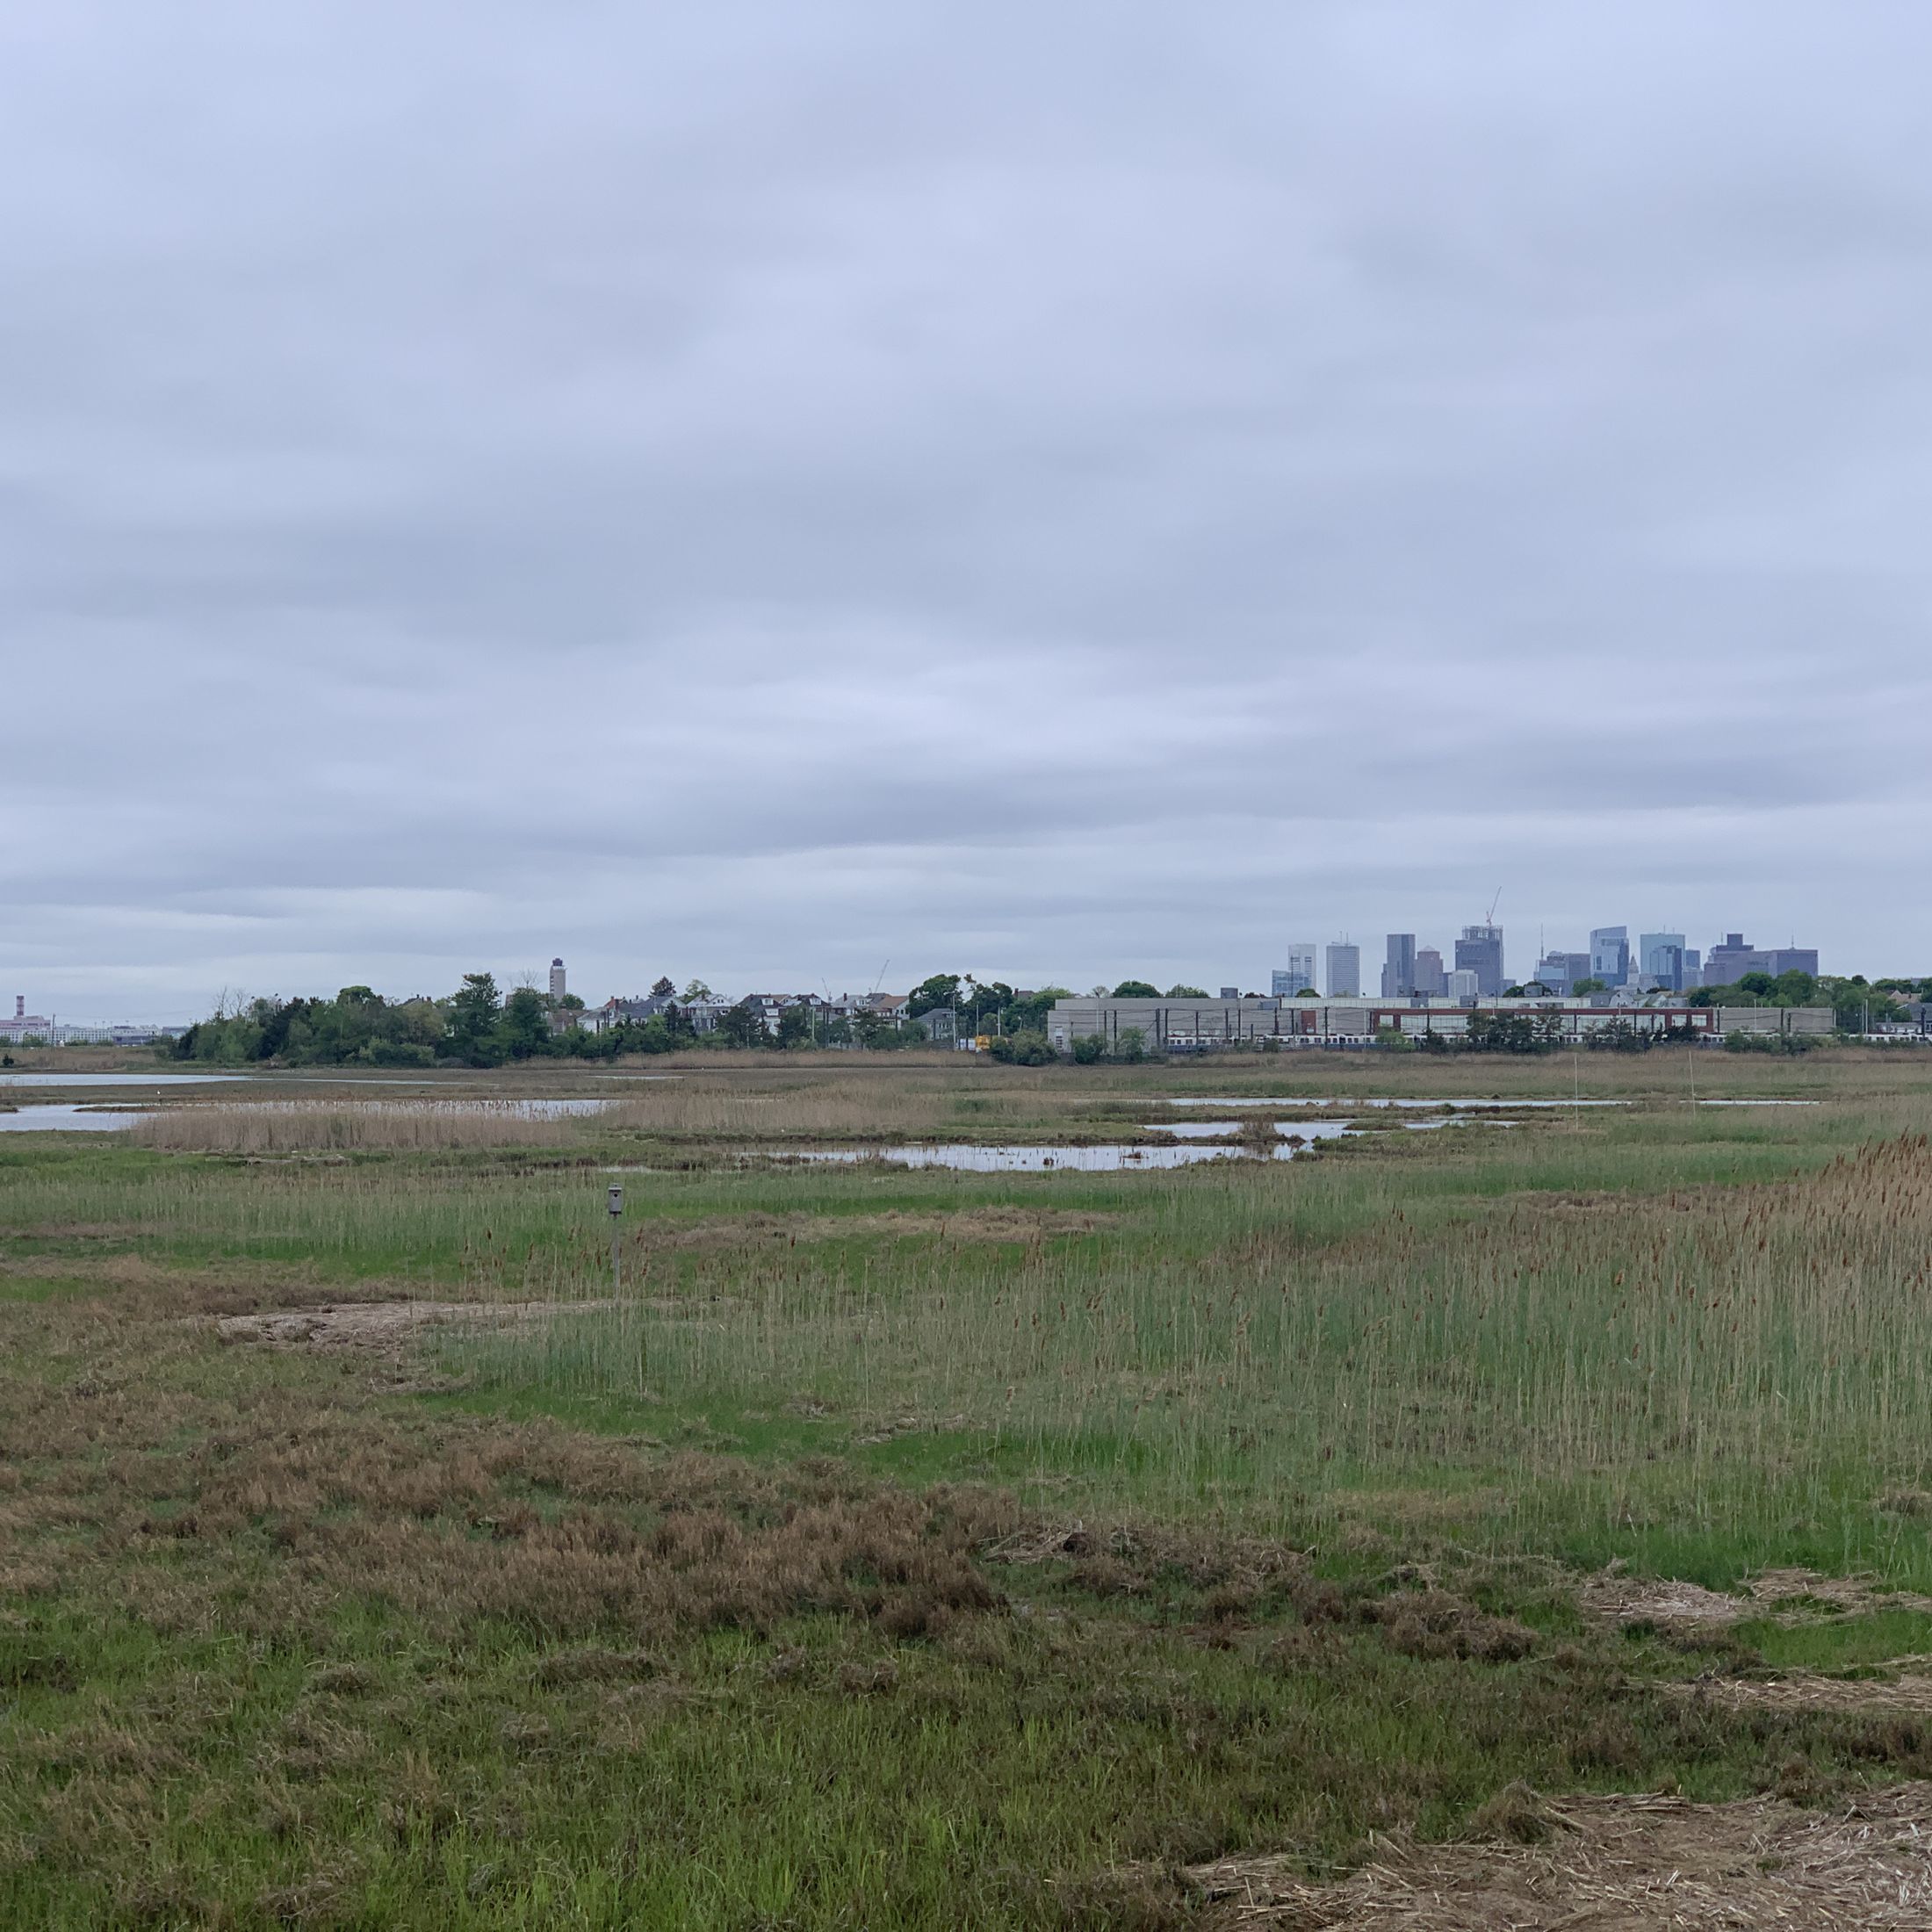 Belle Isle Marsh in the foreground, with Boston Logan Airport and the Boston skyline in the background.